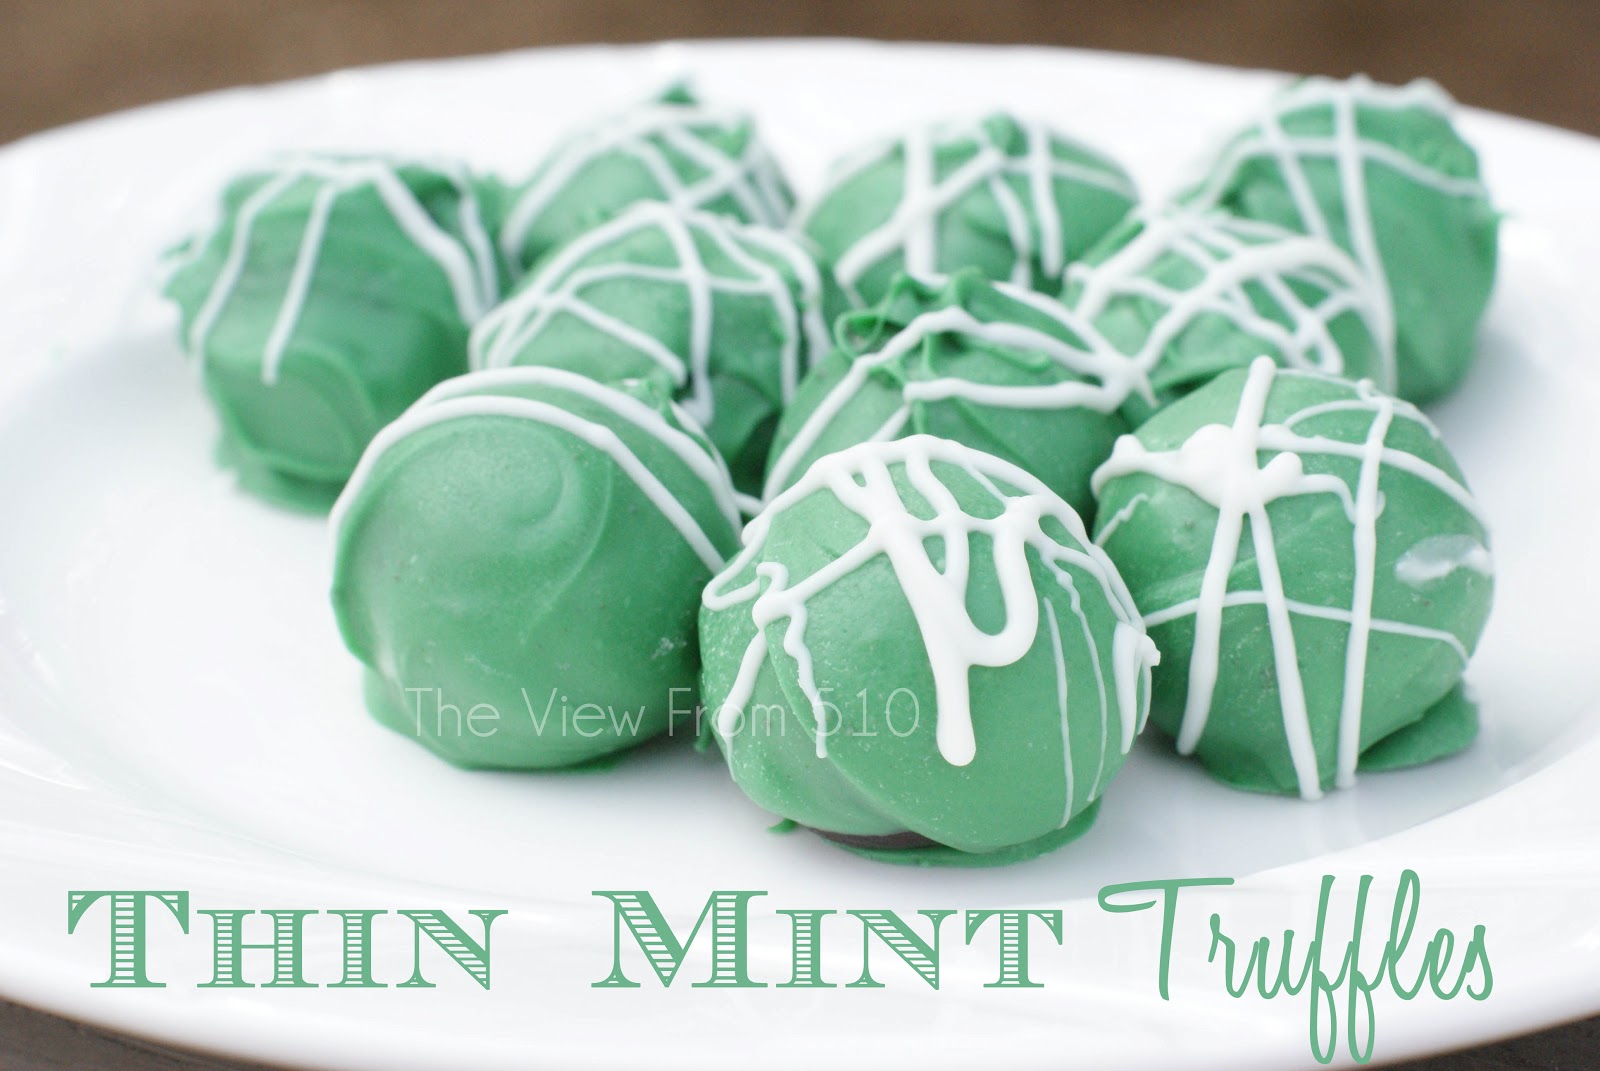 The View From 510: Thin Mint Truffles {Recipe}